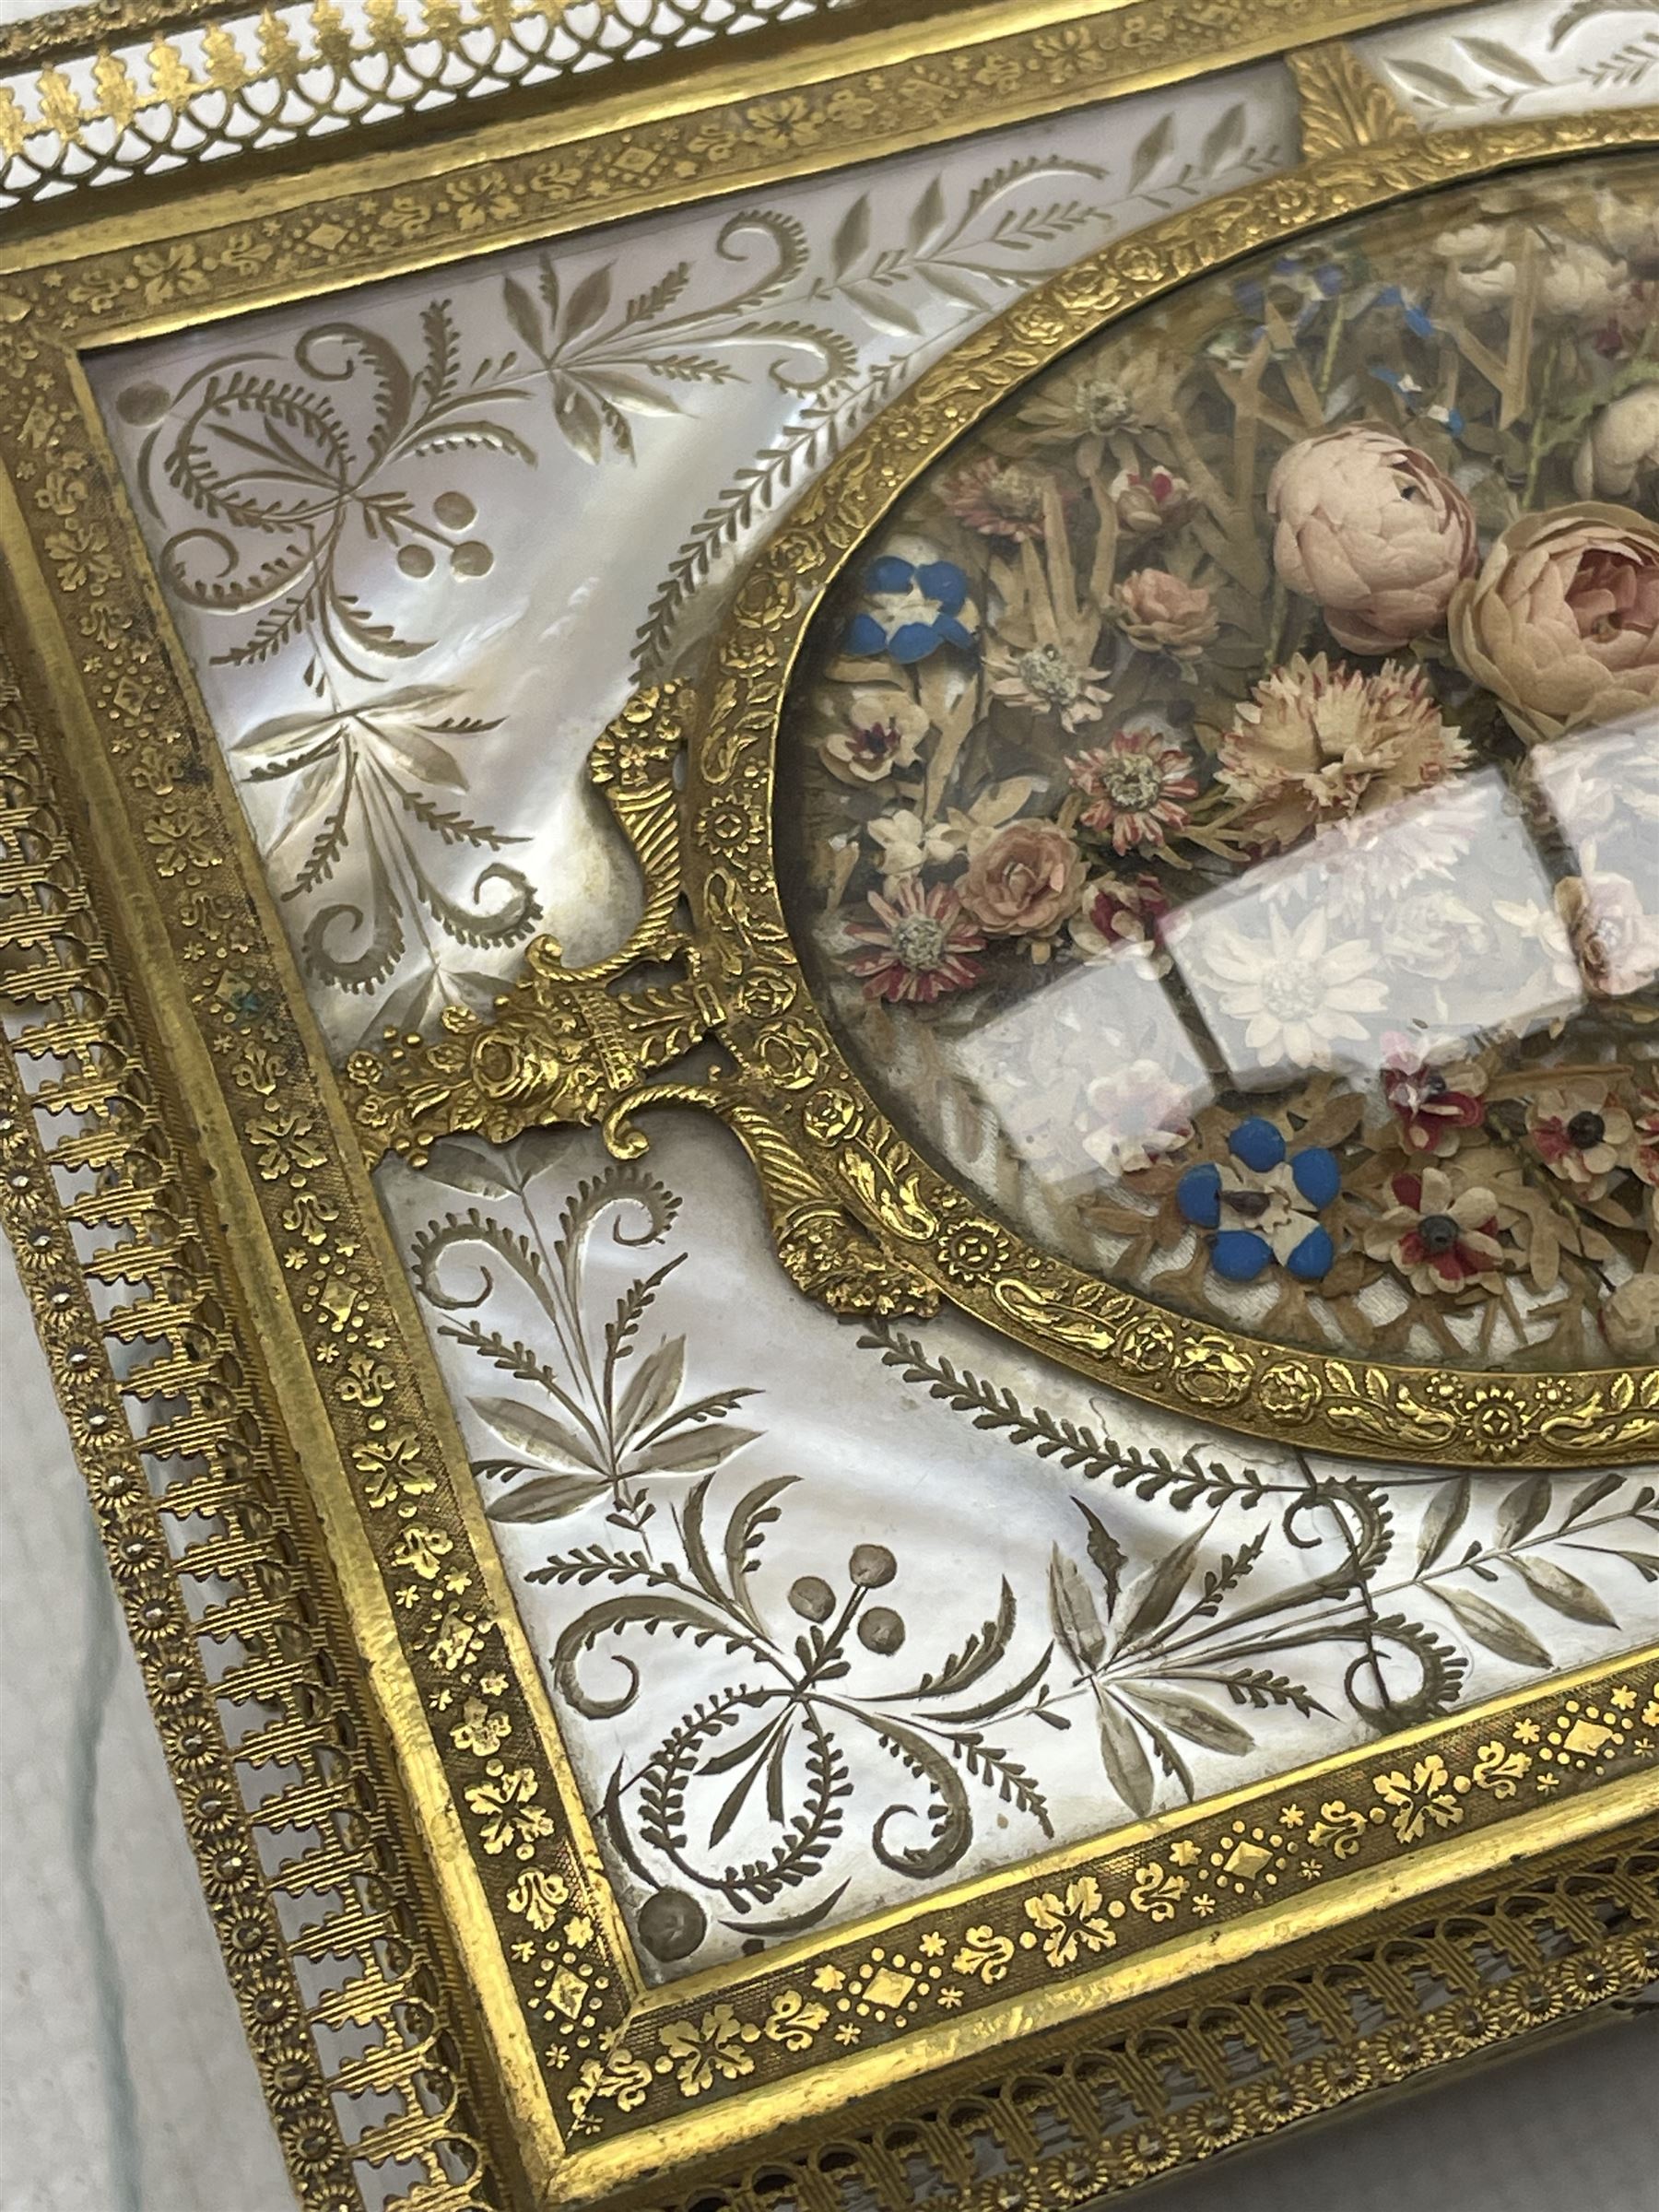 Early 19th century French Palais Royal type ormolu and mother-of-pearl musical sewing etui - Image 12 of 19